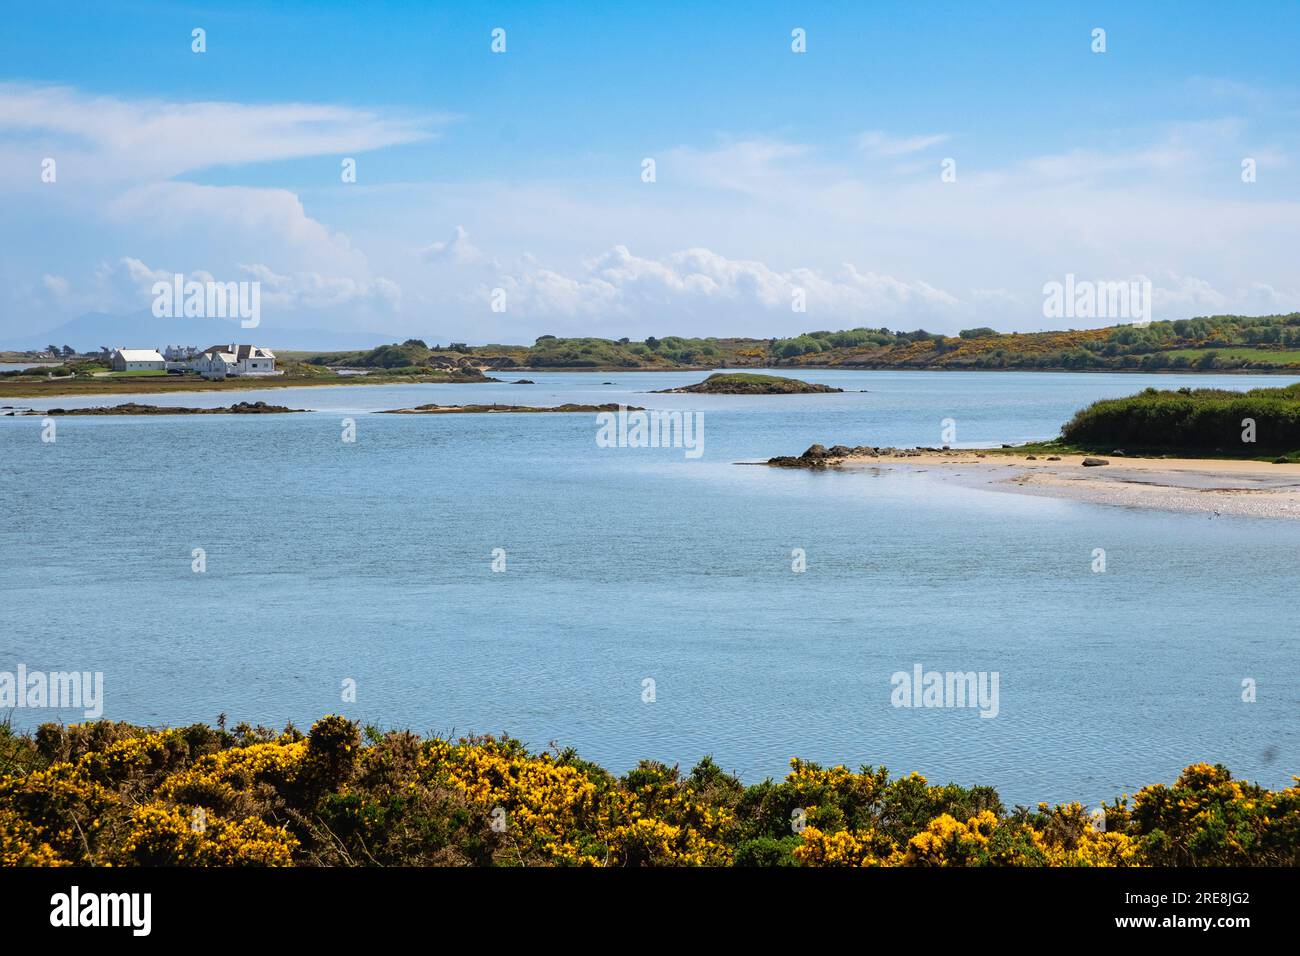 View of Inland Sea at high tide near Llanfairyneubwll, Caergeiliog, Isle of Anglesey, Wales, UK, Britain, Europe Stock Photo